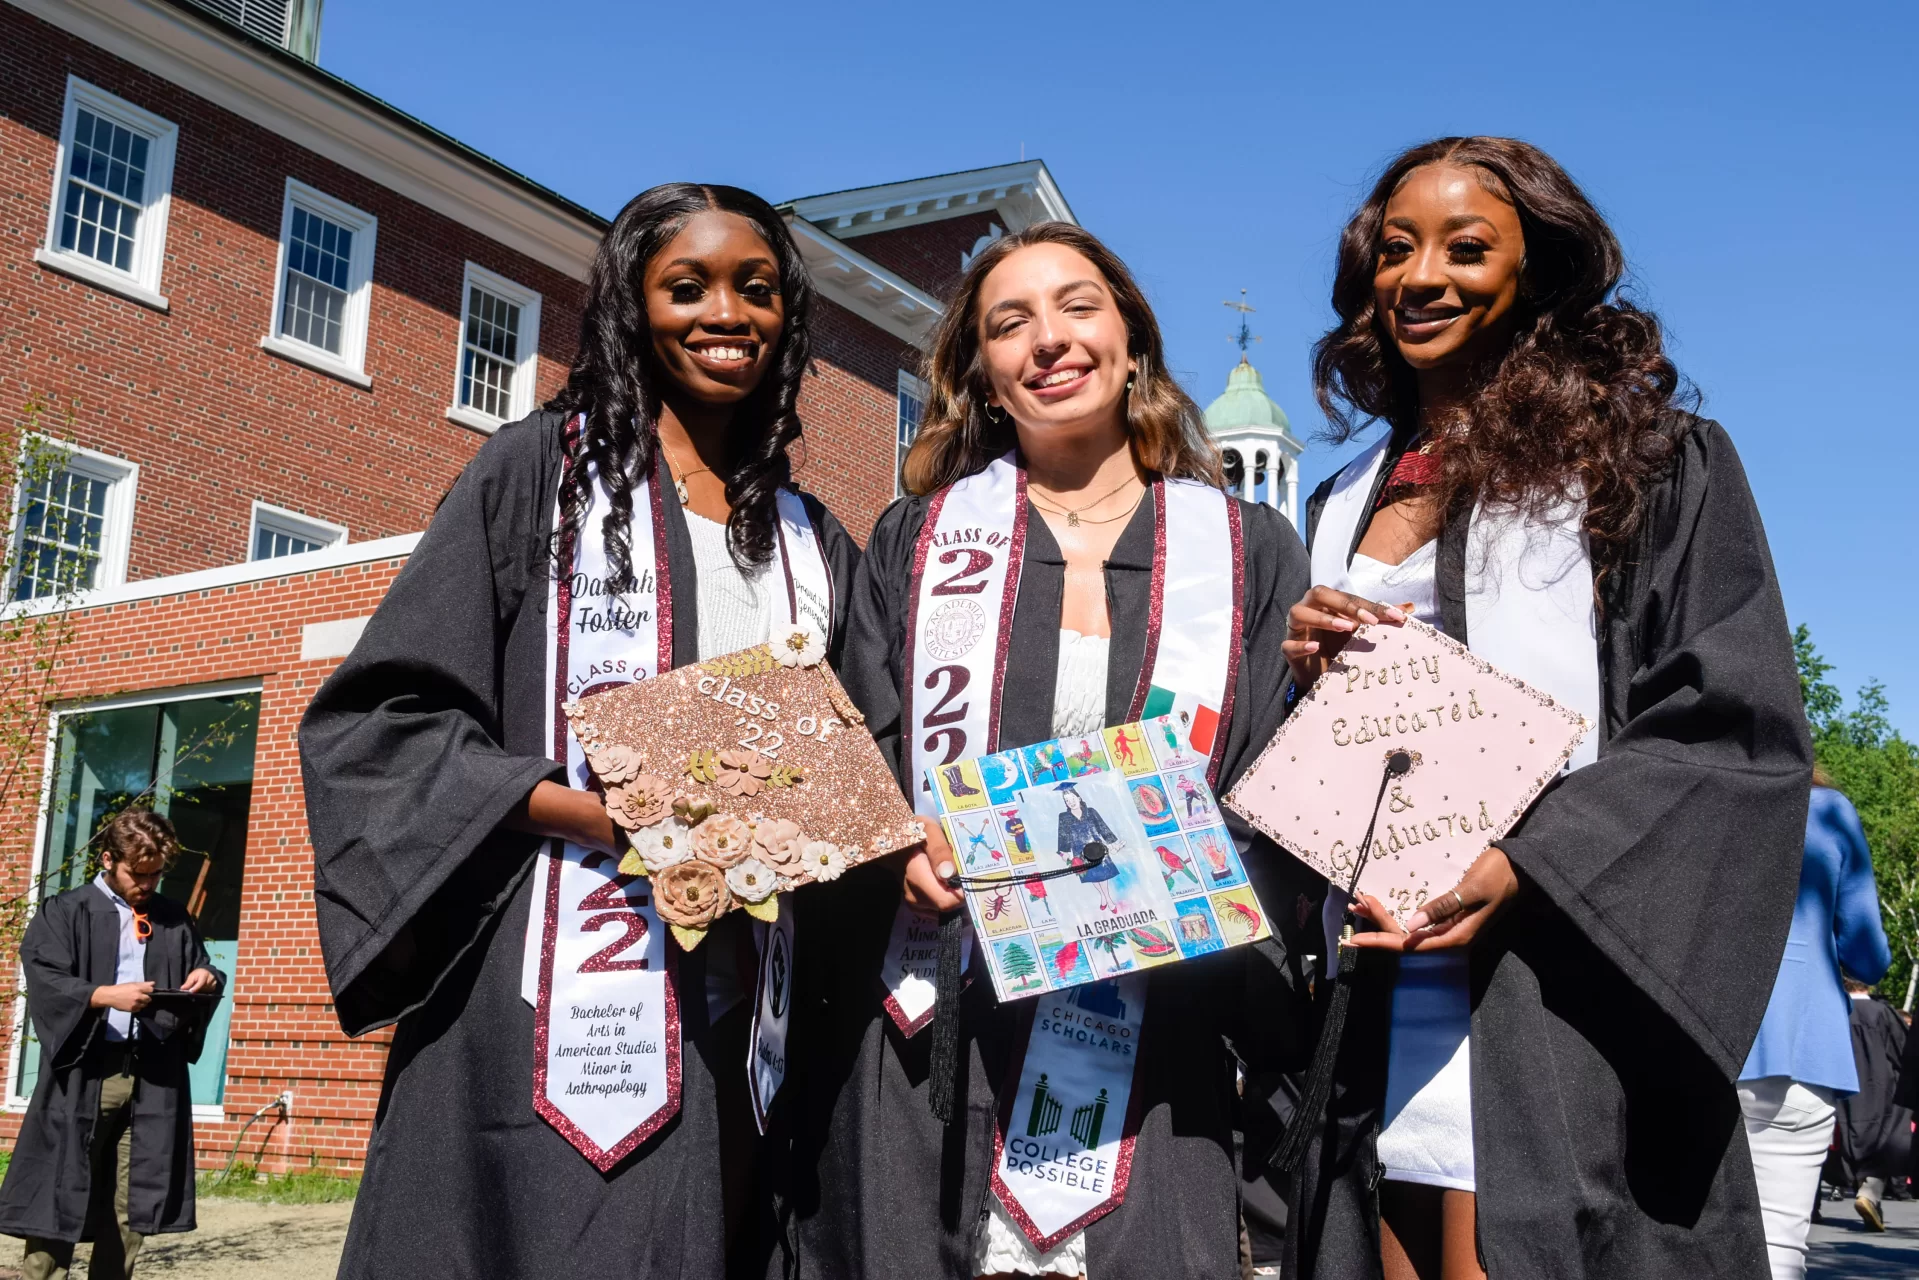 Graduates of the Class of 2022 walked in style at Bates College's 156th Commencement on May 29, 2022, with decorated caps, stoles, and other accessories.

Zane Rahabi ’22, (Lord of the Rings meme) Geology major, mathematics minor, Westwood, Mass.

Rebekah Vaules, ("Up" schoolhouse) French and Francophone studies major, Education, religious studies minors, Pittsford, N.Y.

Olivia Dimond, ("the sexy scholar gig") Theater major, education minor, Henrico, Vir.

Daniah Foster, (pink and gold glitter and flowers) American studies major, anthropology minor, Shelton, Conn.

Rachel Retana, (Mexican loteria board) Politics, gender and sexuality studies majors, African American studies minor, Chicago, Ill.

Adama Diaby, ("pretty, educated & graduated") politics major, history minor, New York

Janell Sato, (haku lei with red roses and raffia) biology major, religious studies minor, Honolulu, Hawai’i

Isabella David, ("keep moving forward") politics major, rhetoric, film, and screen studies minor, East Elmhurst, N.Y.

Jenniflore Beaubrun, (flowers on side and red ribbons) mathematics major, African American studies and digital and computational studies minors, Hyde Park, Mass.

Alex Teplitz, (googly eyes) English major, gender and sexuality studies minor, he/they, New York

Ojochenemi Maji, (daisies and butterflies on cap, nails, and stole) geology major, digital and computational studies minor, Nigeria